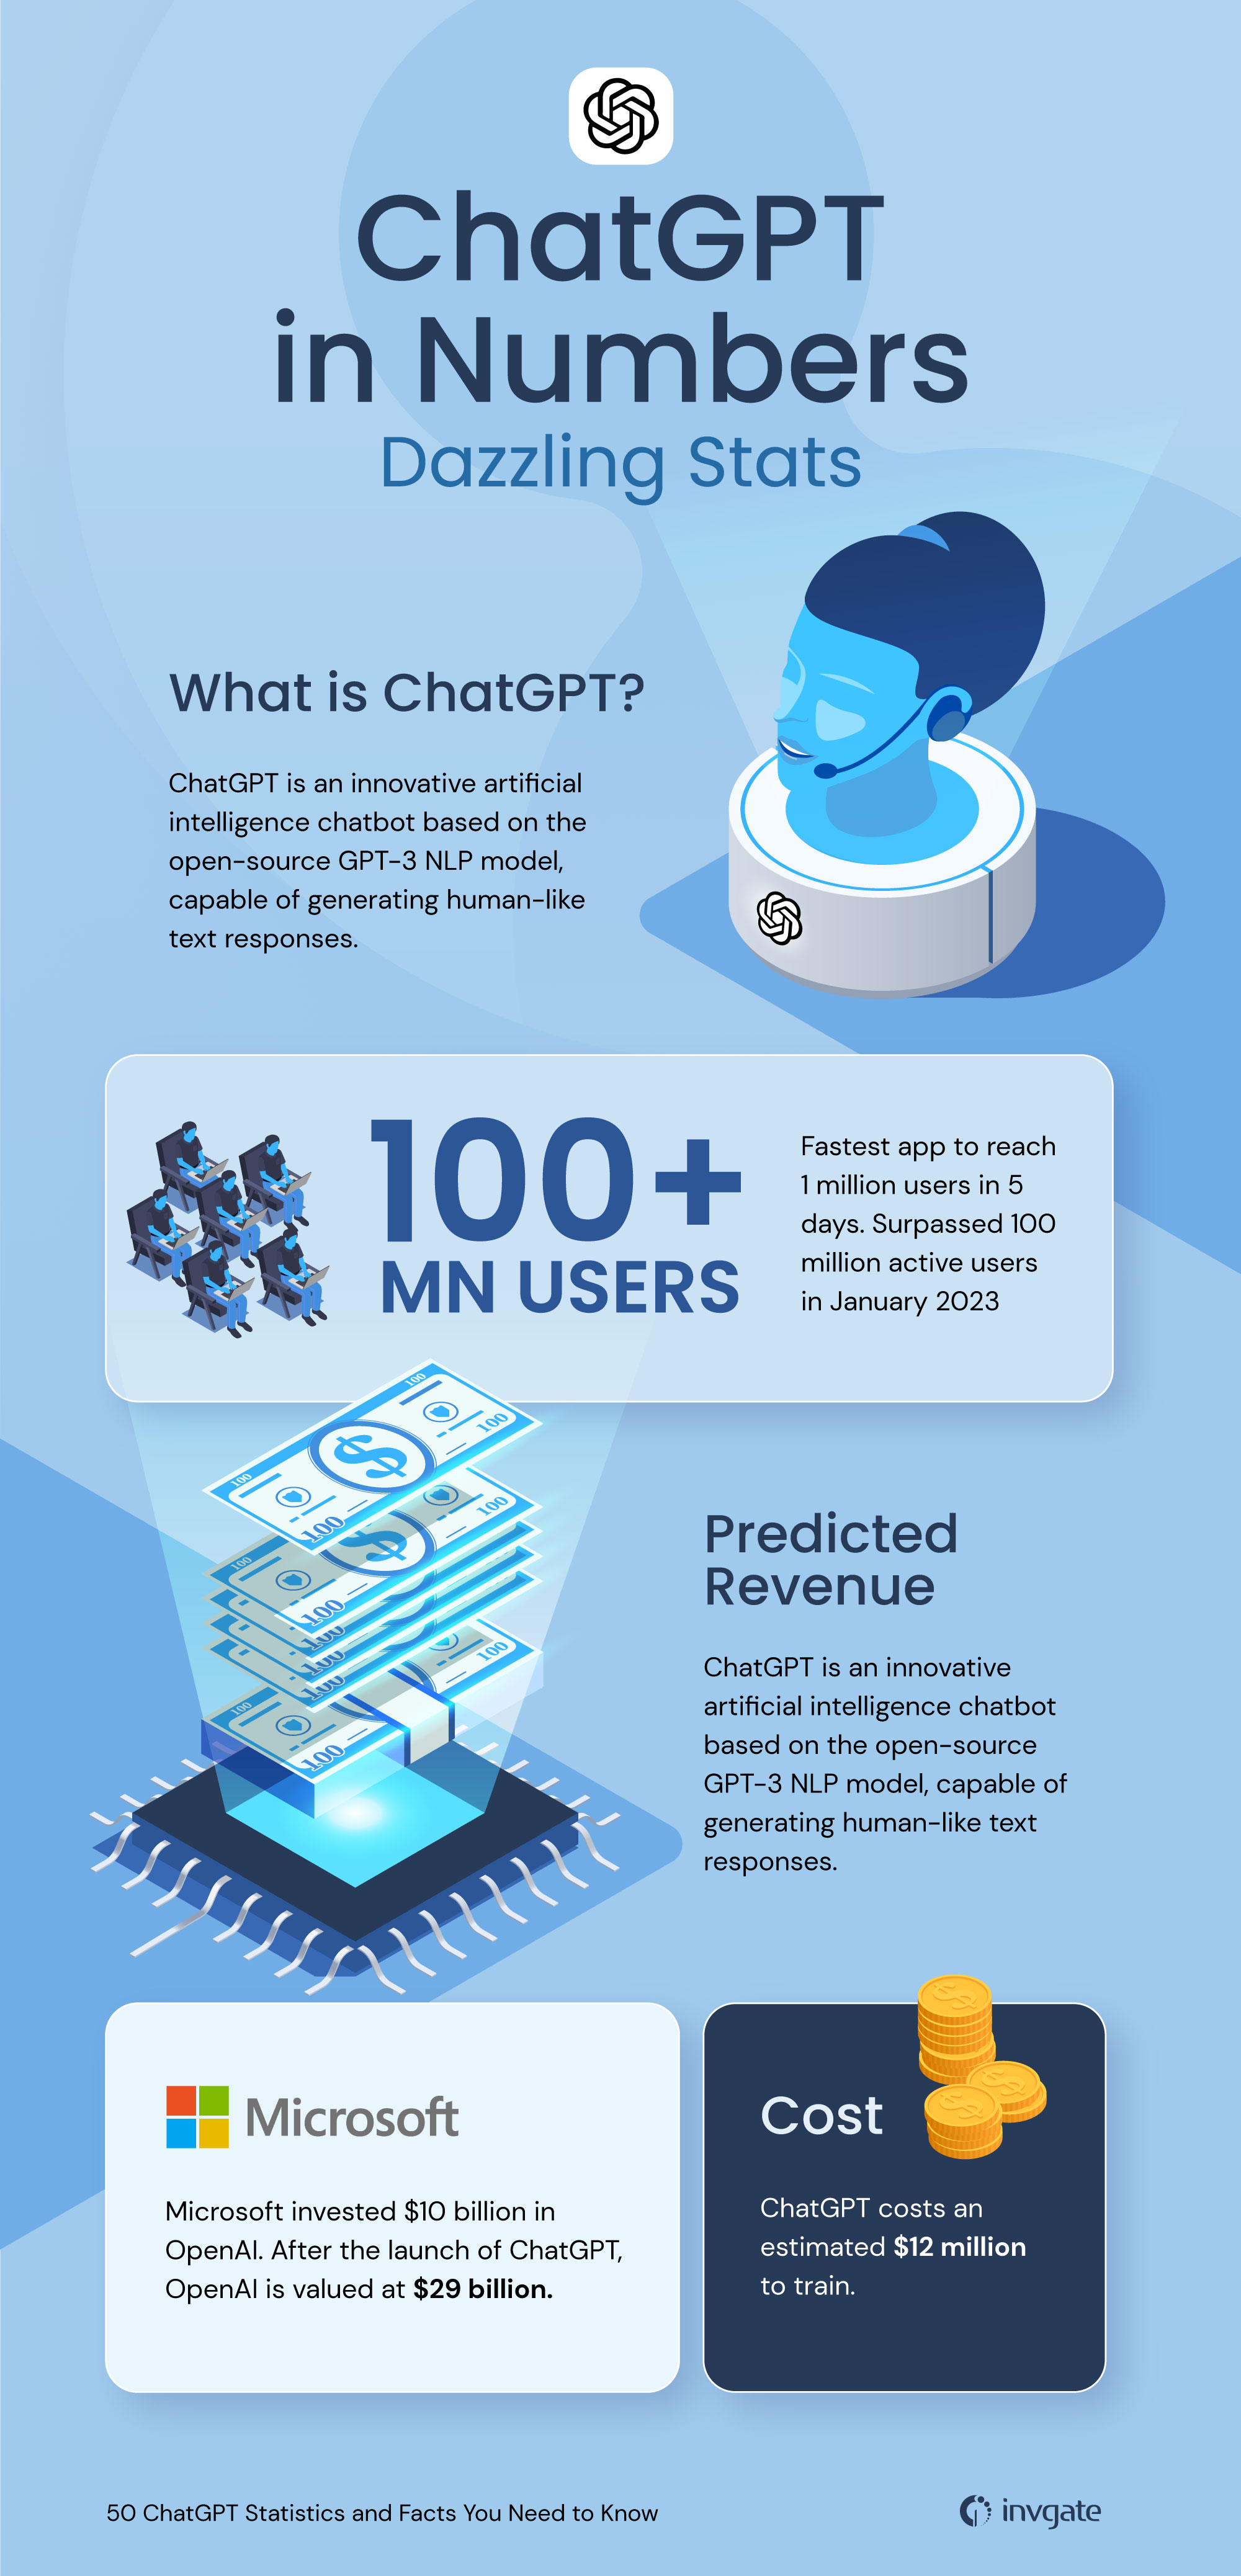 50 ChatGPT Statistics and Facts You Need to Know